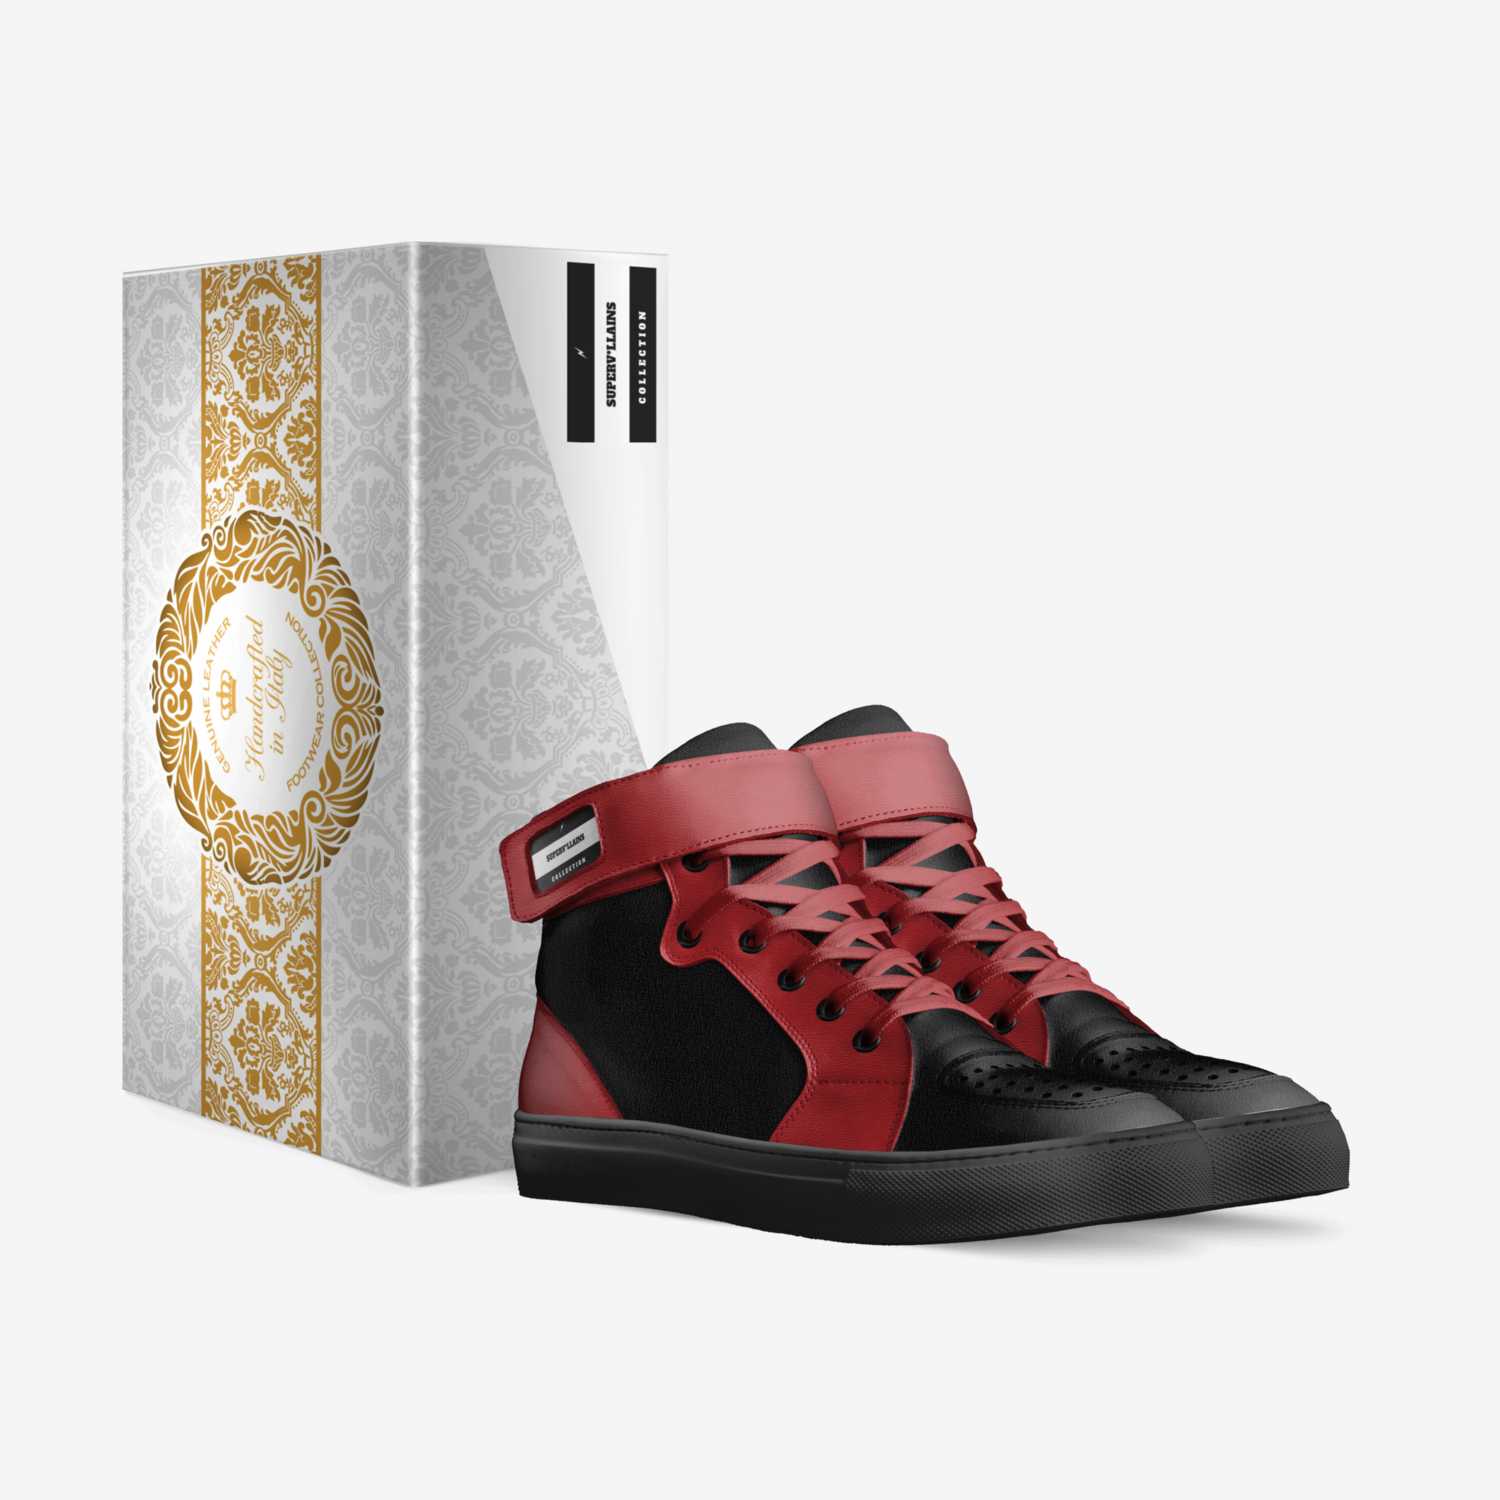 SUPERV*LLAIN1s custom made in Italy shoes by Johnny Lopez | Box view